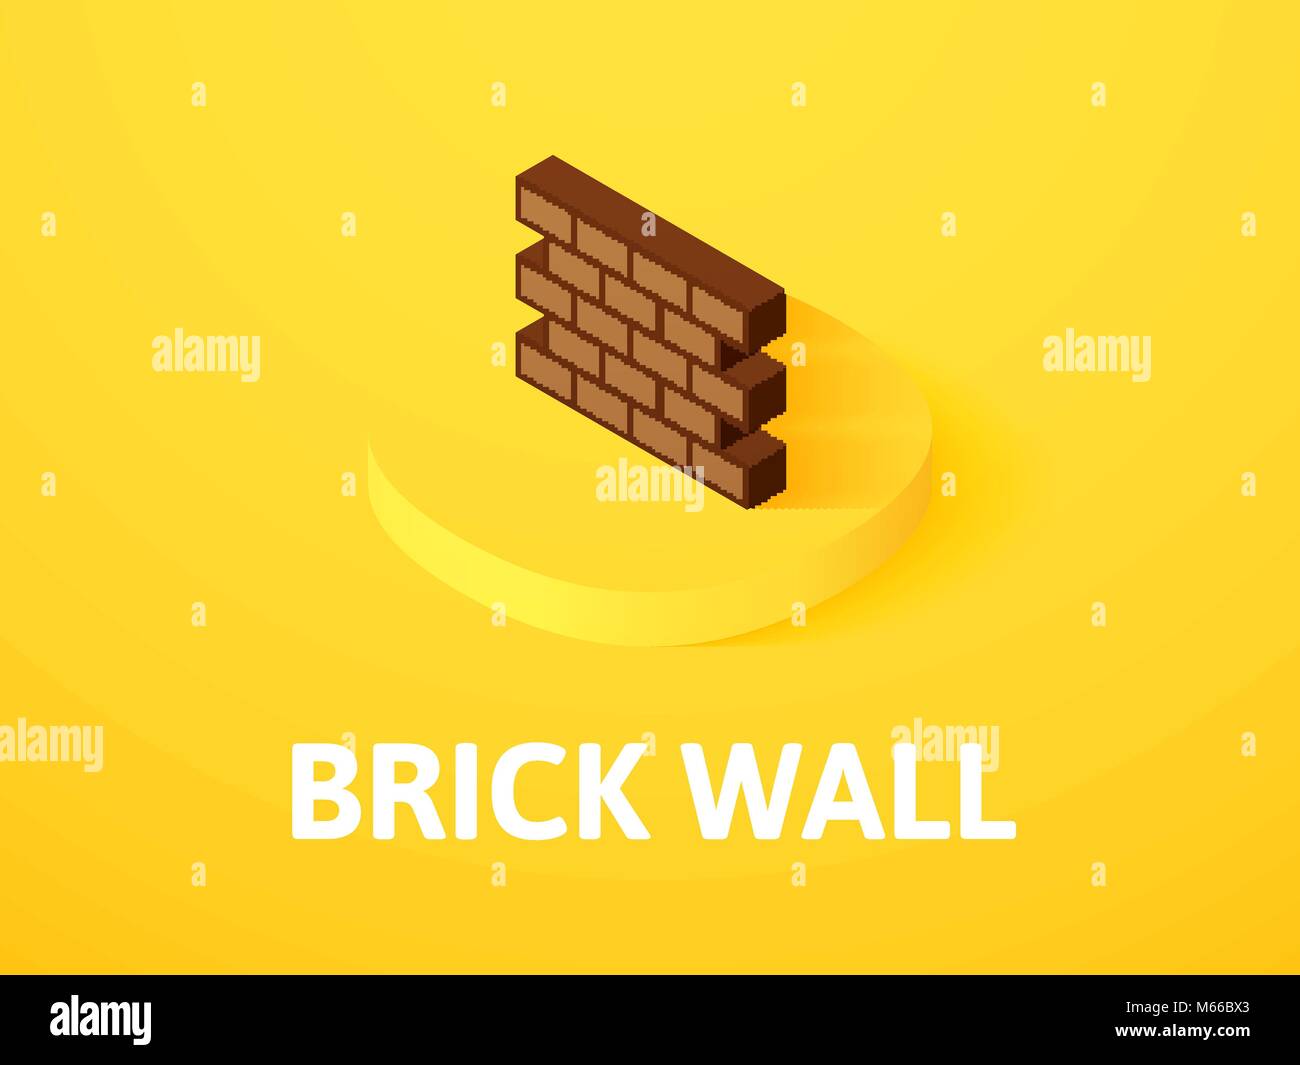 Brick wall isometric icon, isolated on color background Stock Vector